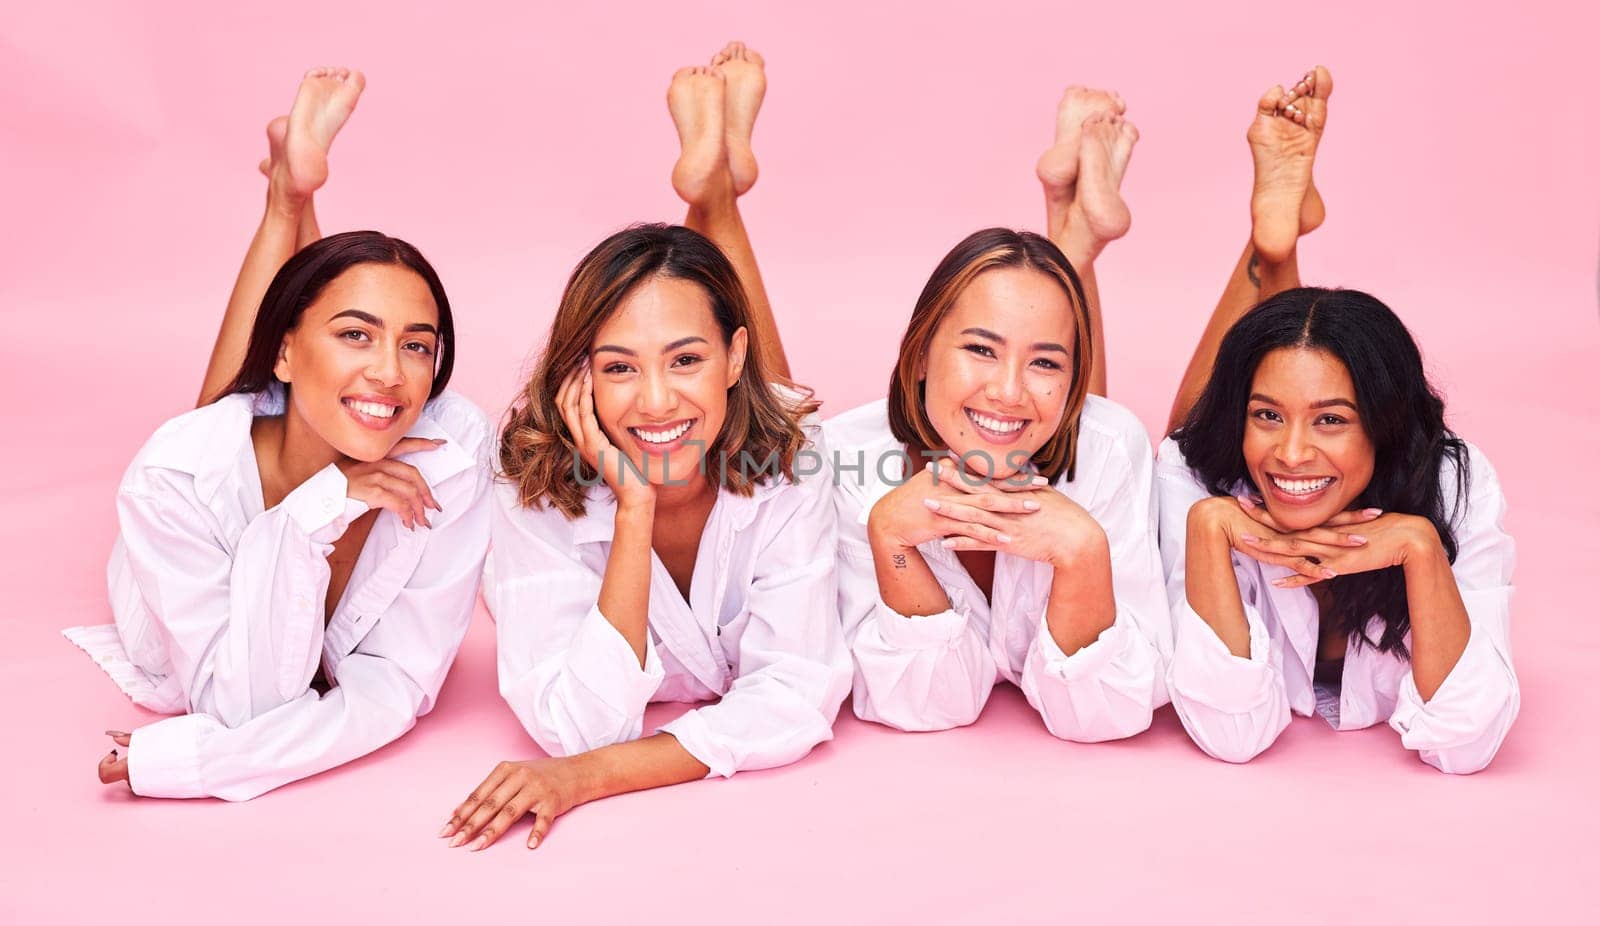 Portrait, smile and lingerie with model friends on a pink background in studio for natural skincare. Diversity, beauty and wellness with a group of women posing for health, inclusion or cosmetics by YuriArcurs